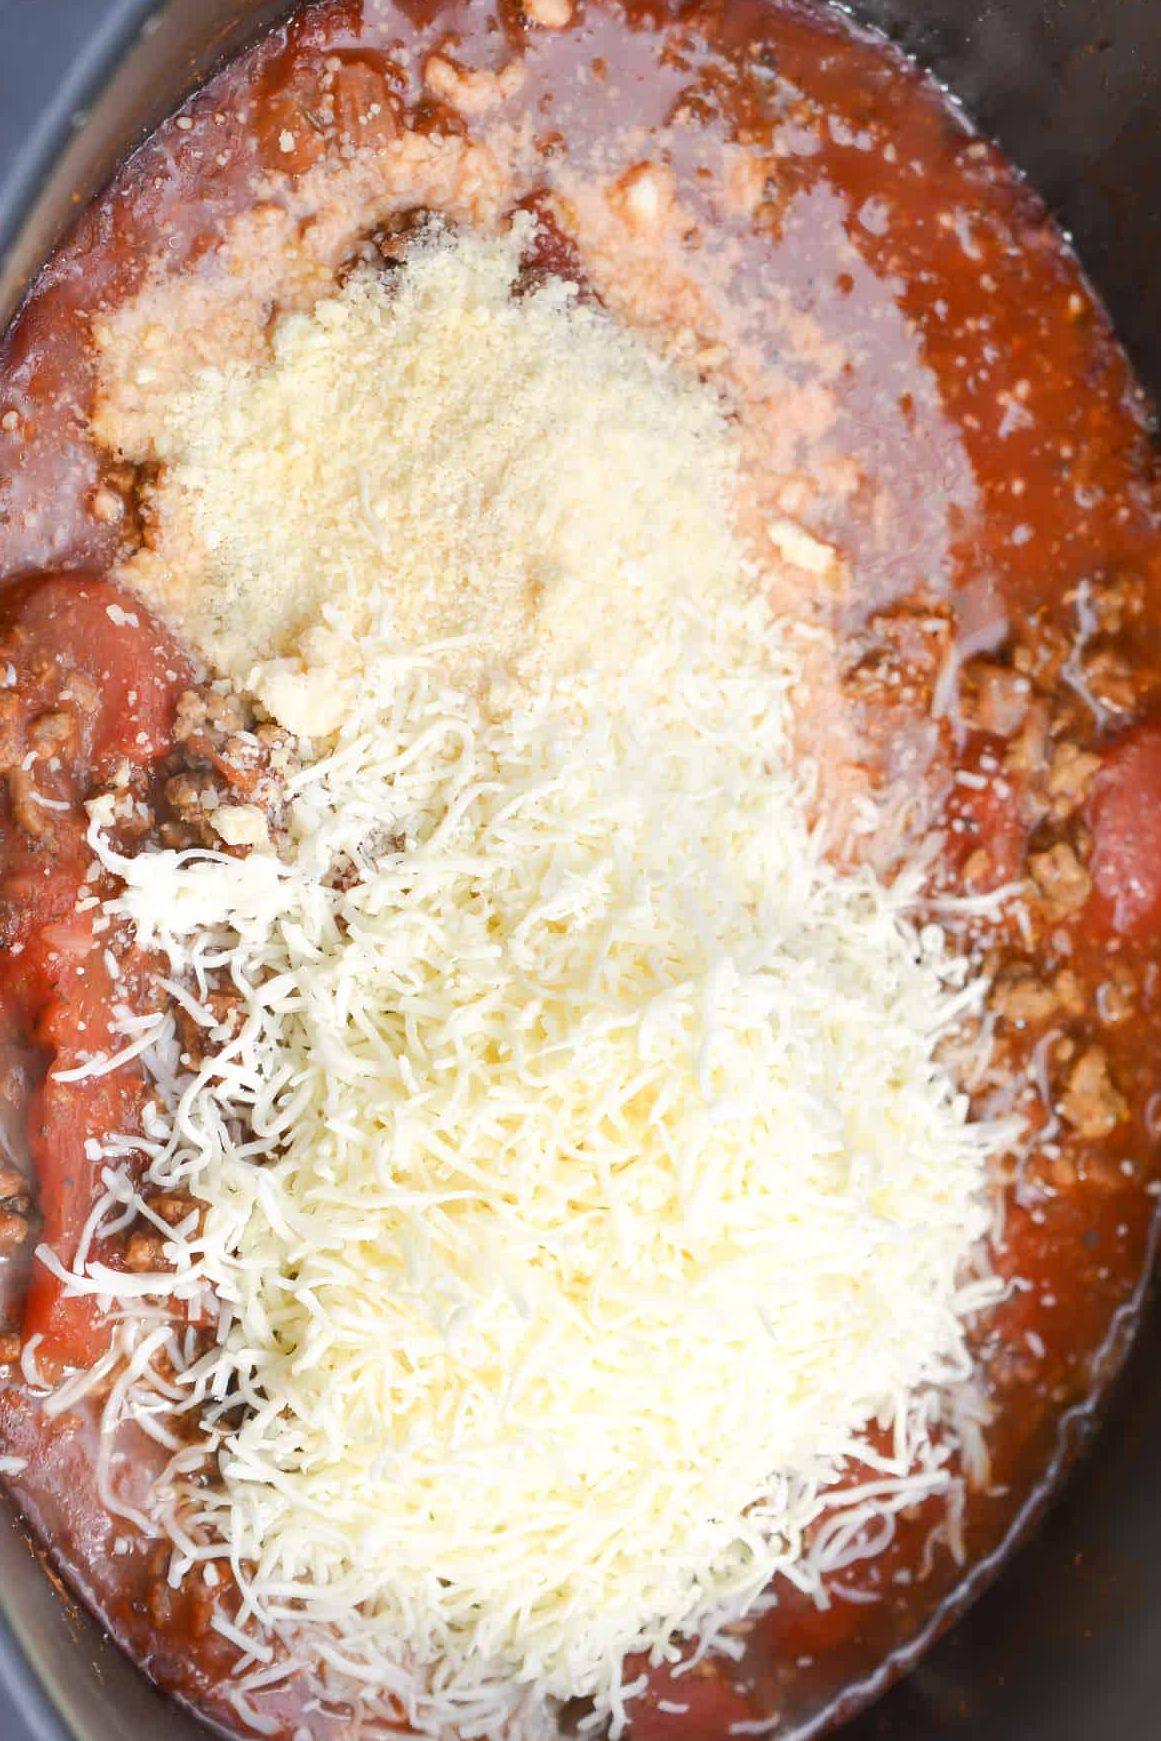 In the last 30 minutes of cook time, add ½ cup of parmesan cheese, and 1 cup of Mozzarella cheese shredded.